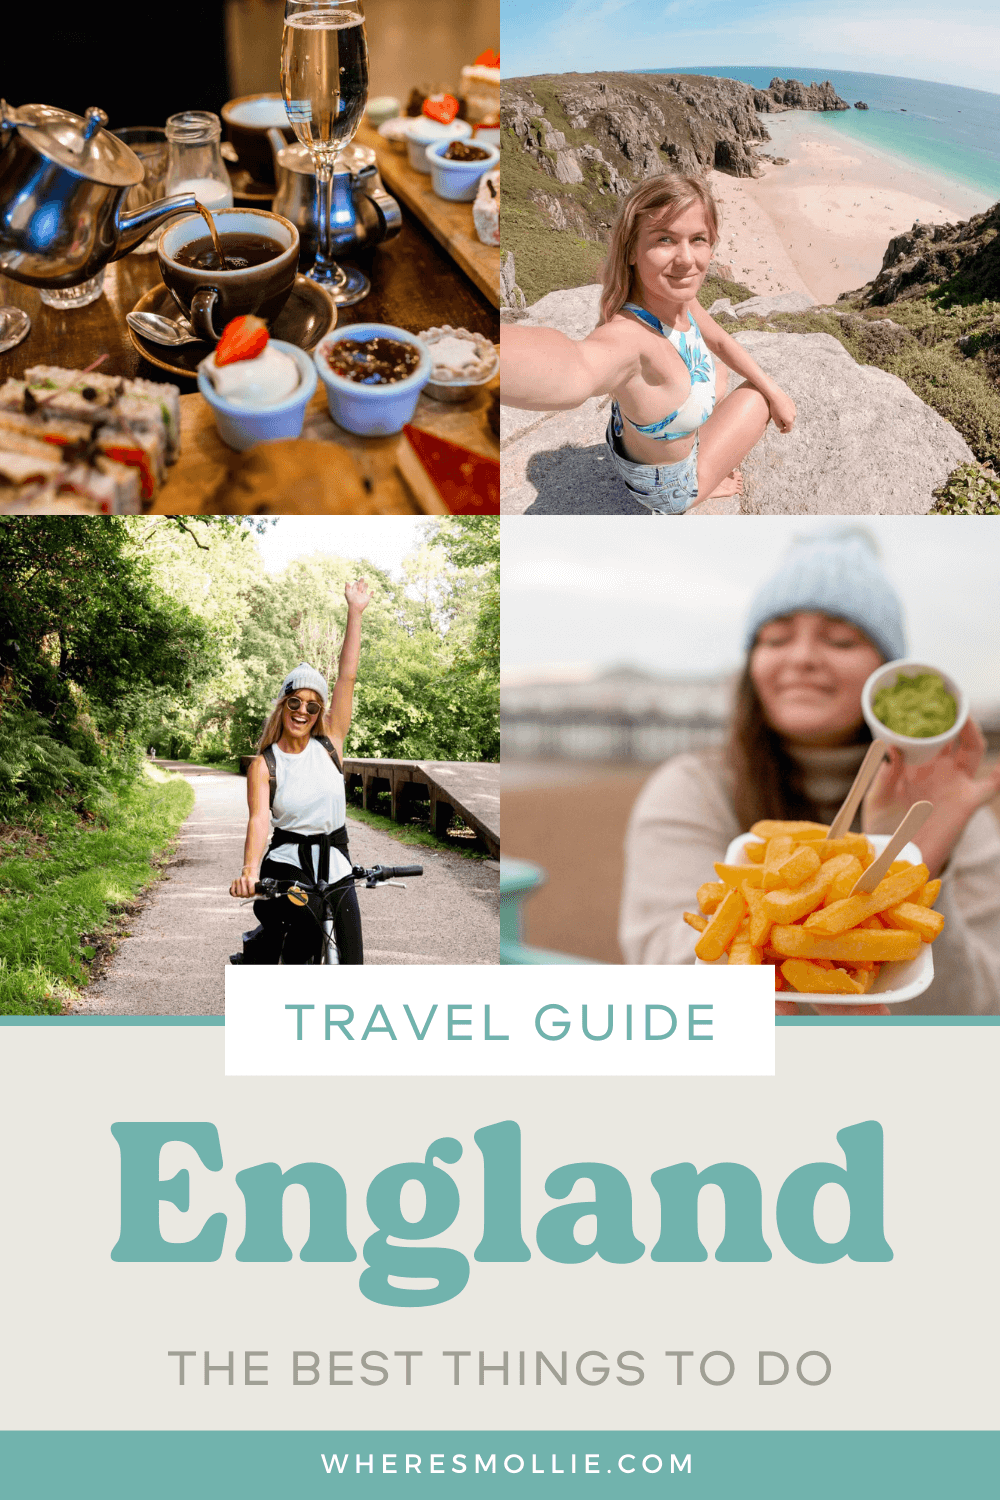 The best things to do in England